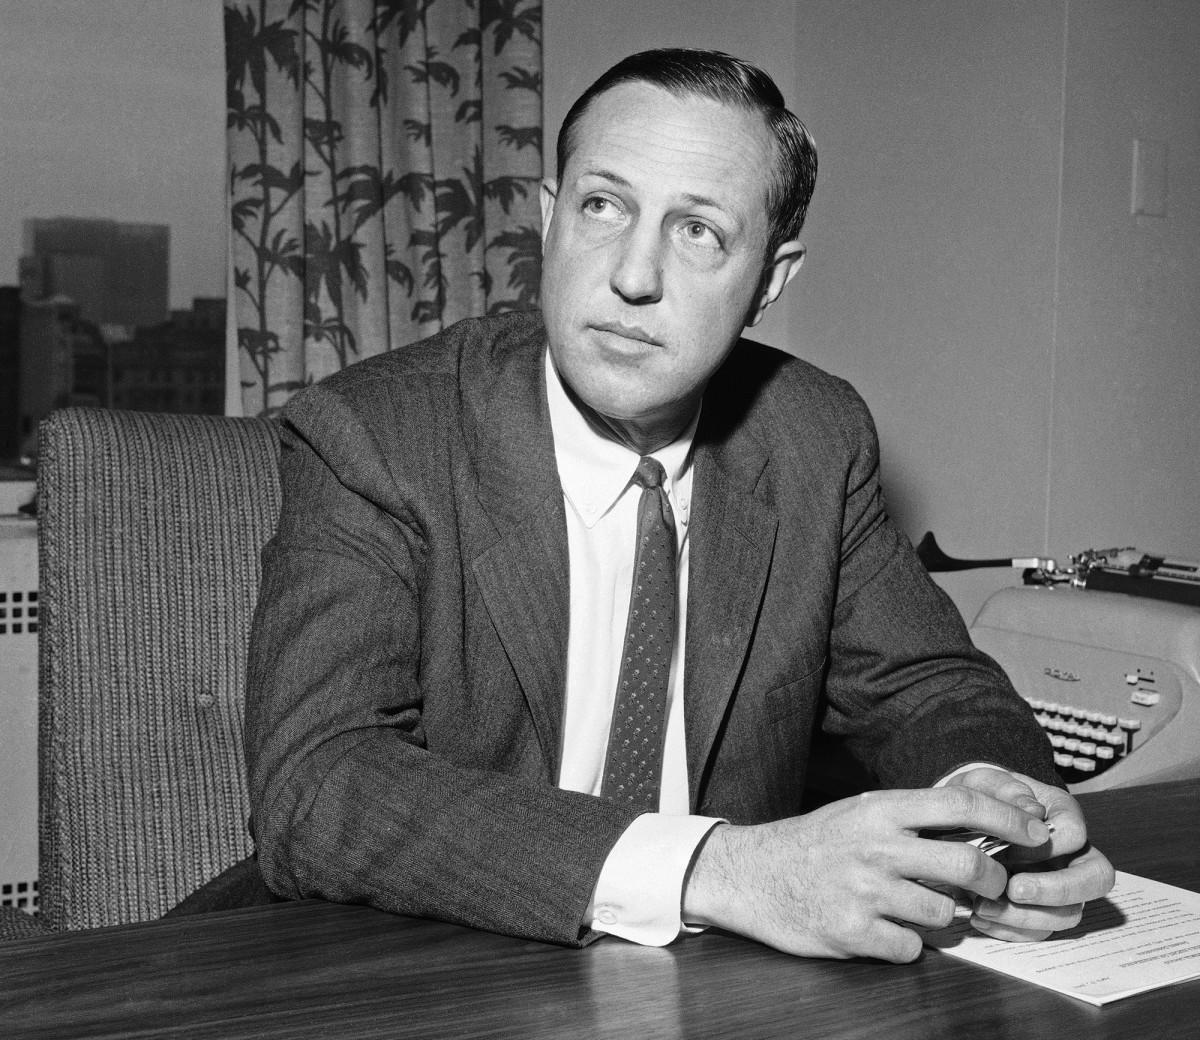 Former NFL commissioner Pete Rozelle made the decision to play NFL games two days after the assassination of John F. Kennedy on Nov. 22, 1963.